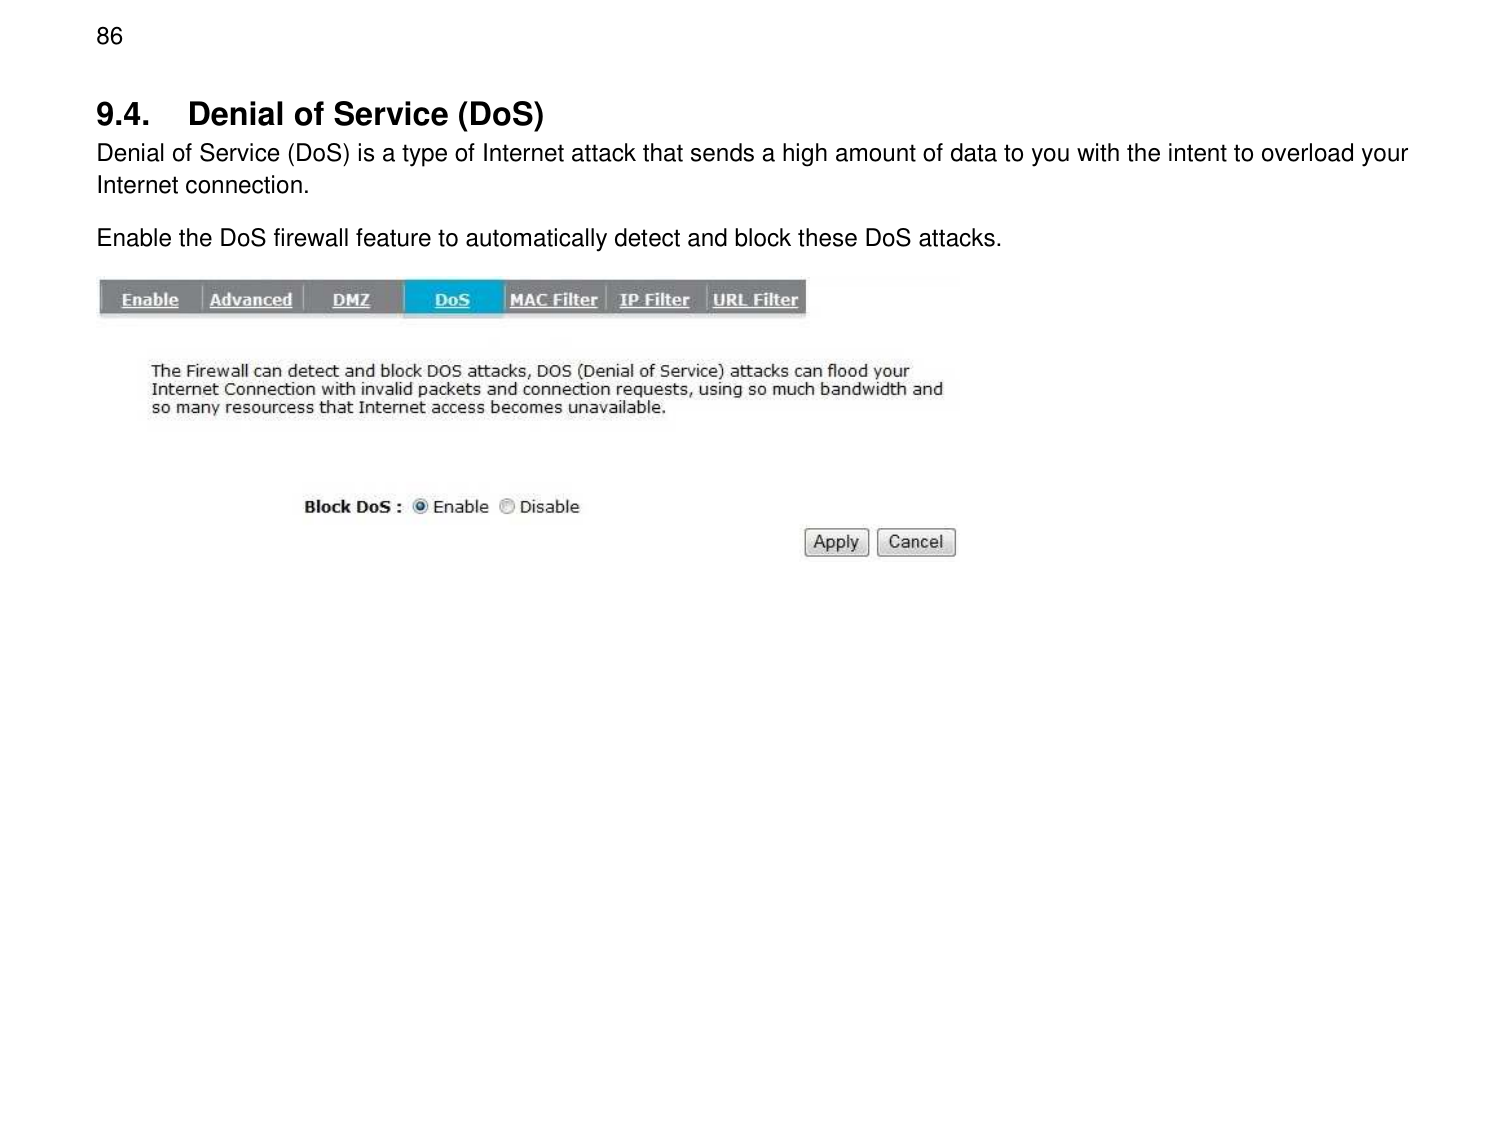  86 9.4.  Denial of Service (DoS) Denial of Service (DoS) is a type of Internet attack that sends a high amount of data to you with the intent to overload your Internet connection. Enable the DoS firewall feature to automatically detect and block these DoS attacks.  